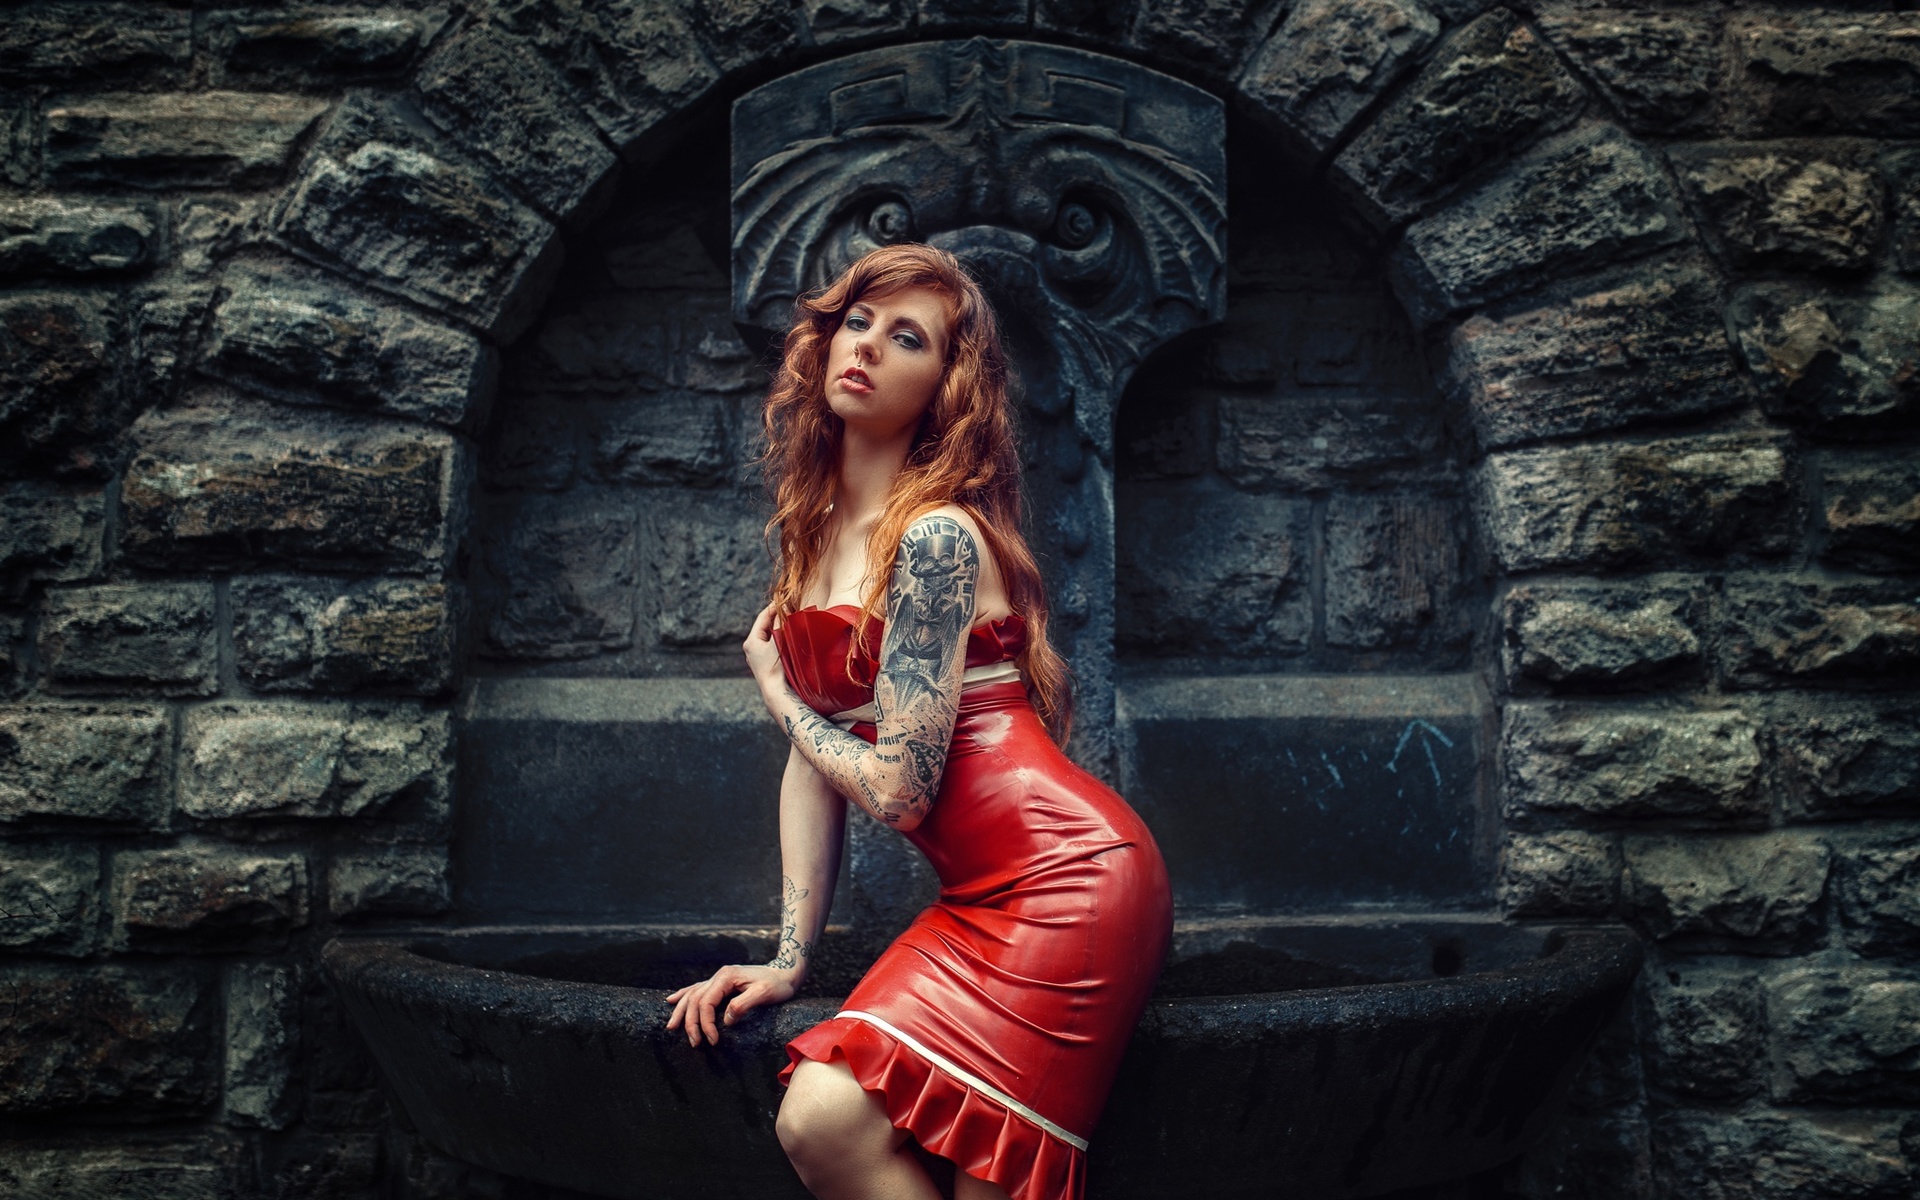 model, fountain, tattoo, redhead, girl, red dress, latex, red, julia wendt, style, pose